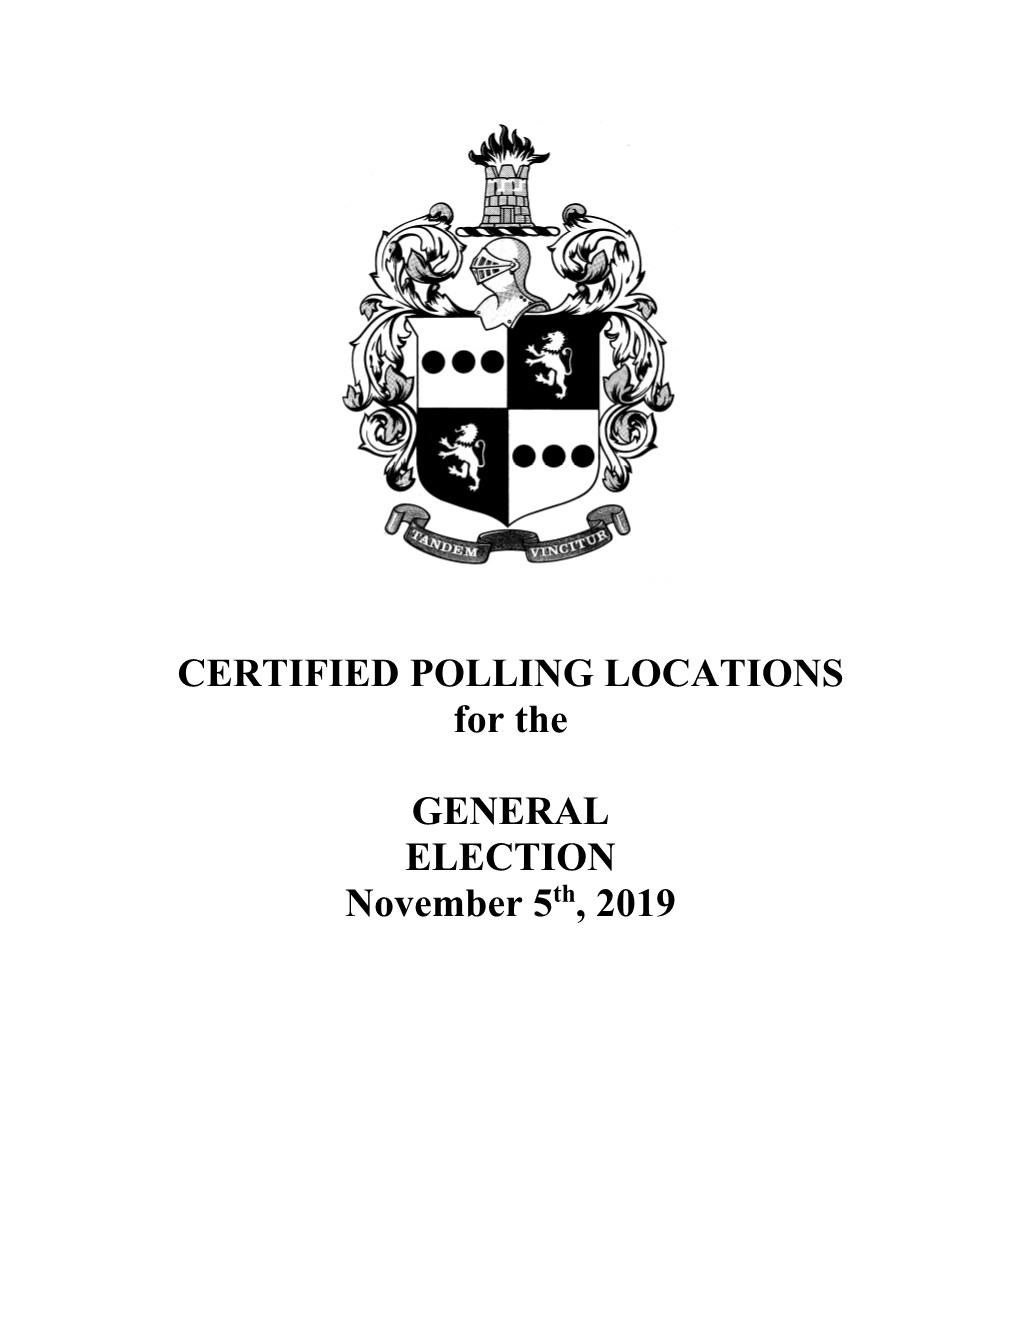 CERTIFIED POLLING LOCATIONS for the GENERAL ELECTION